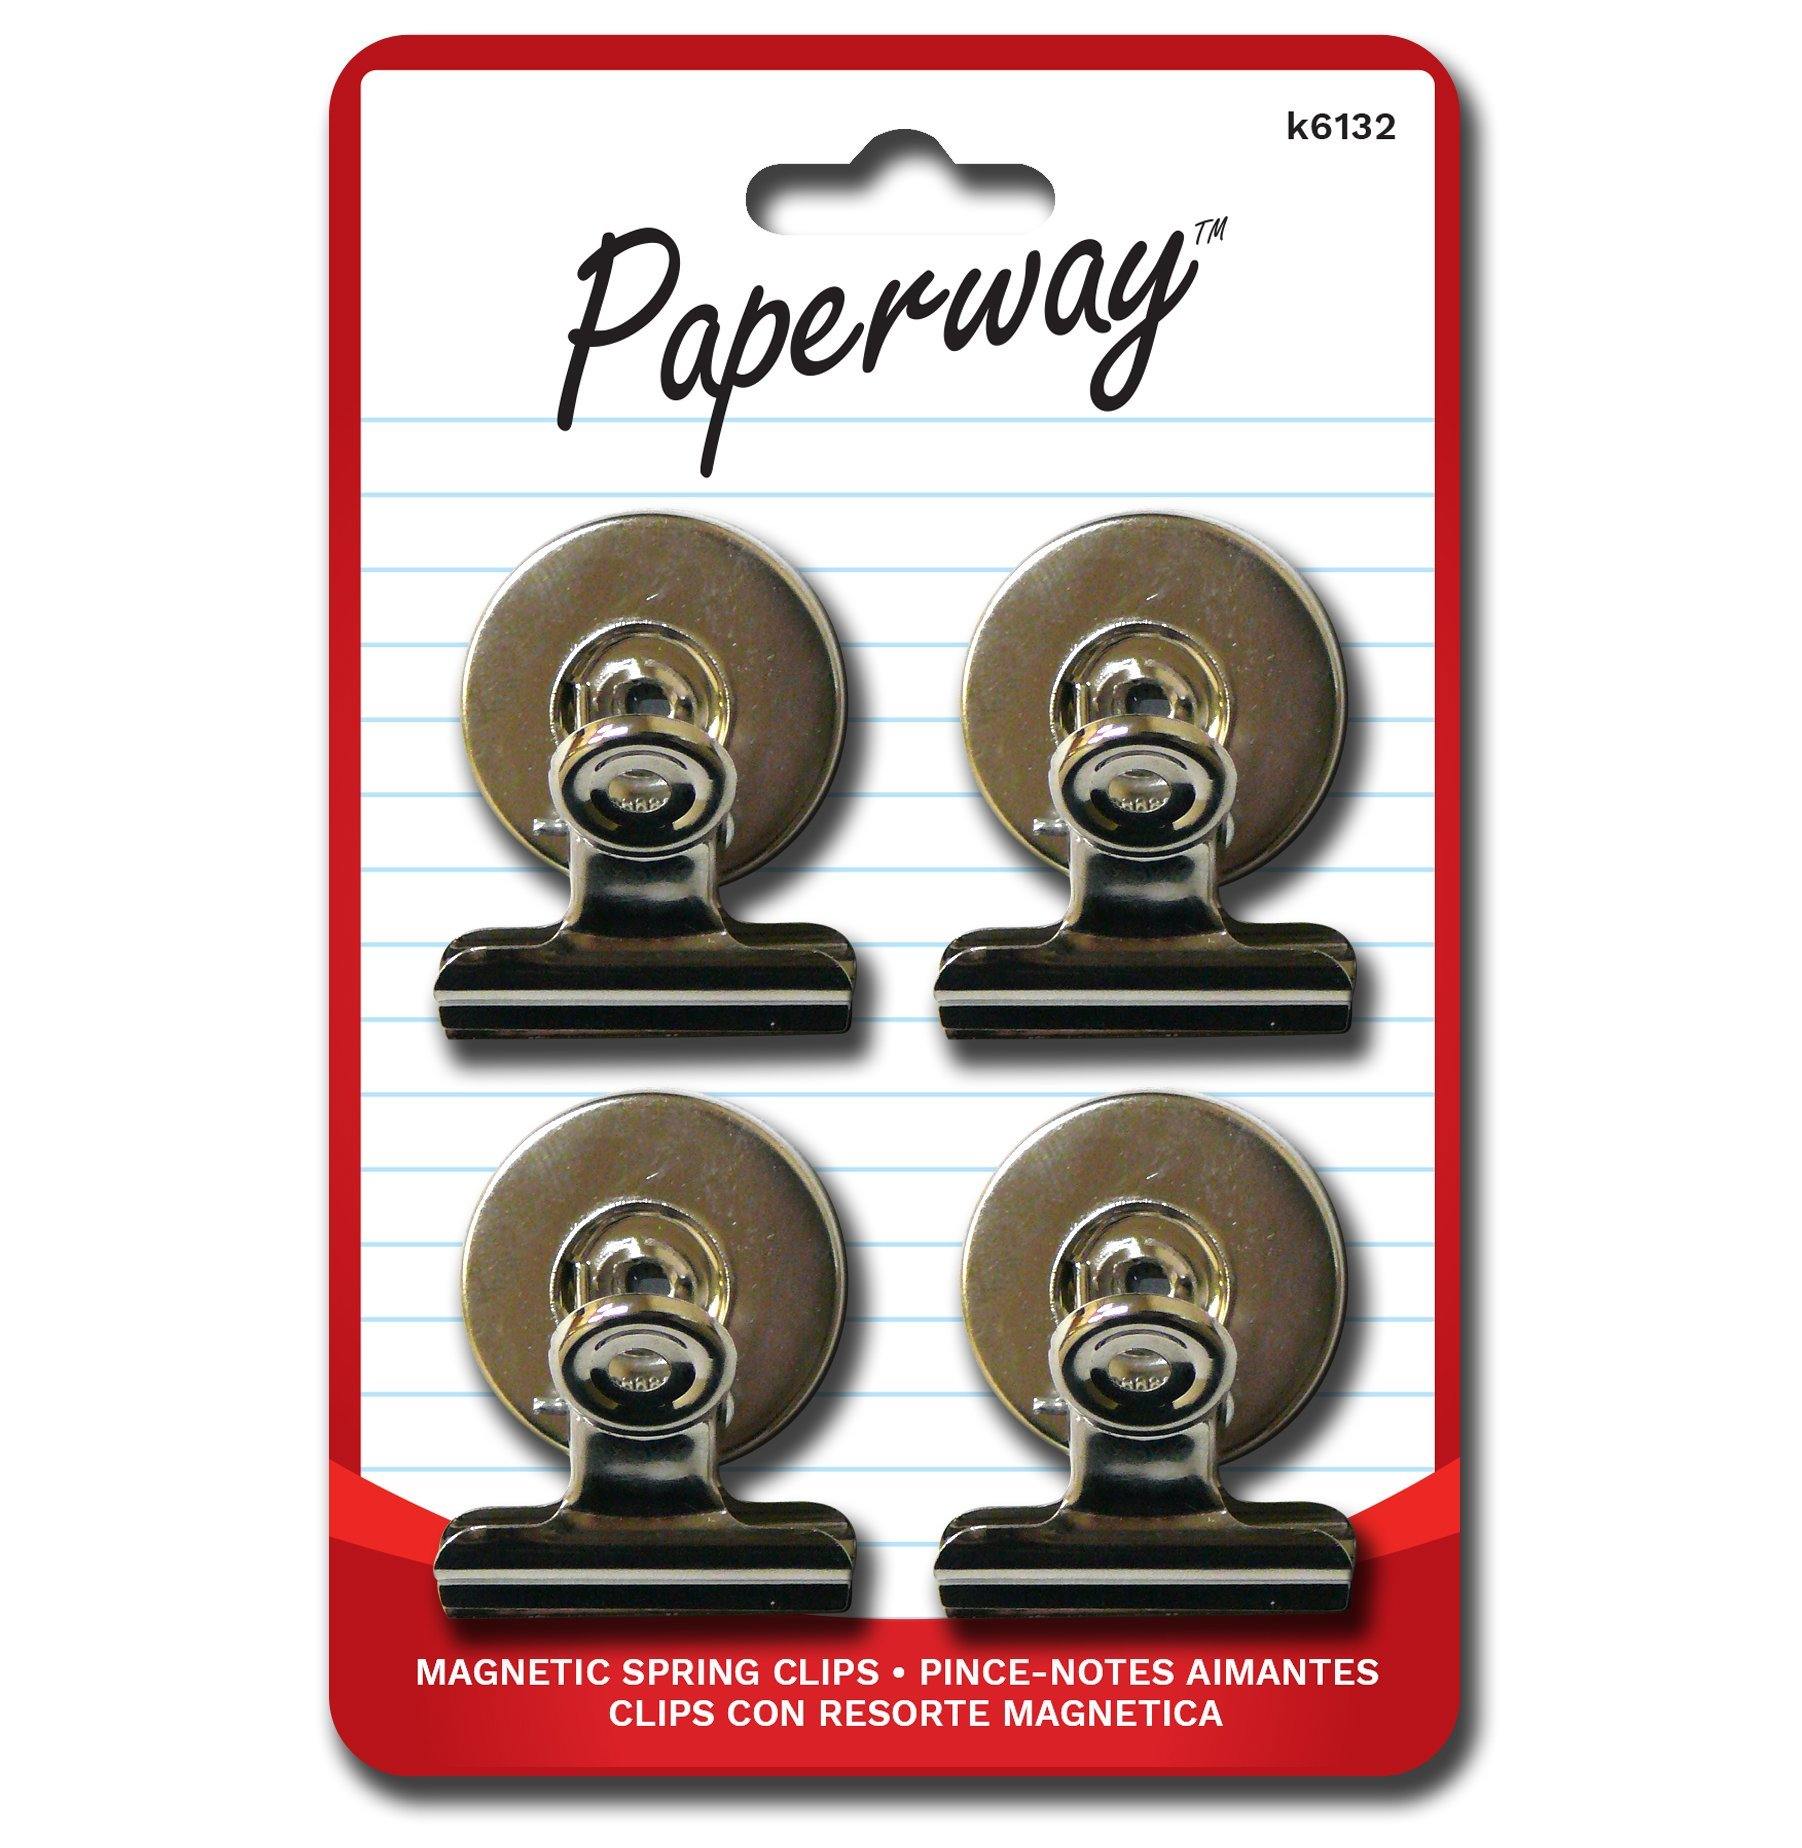 4 Magnetic Spring Clips - Dollar Max Depot